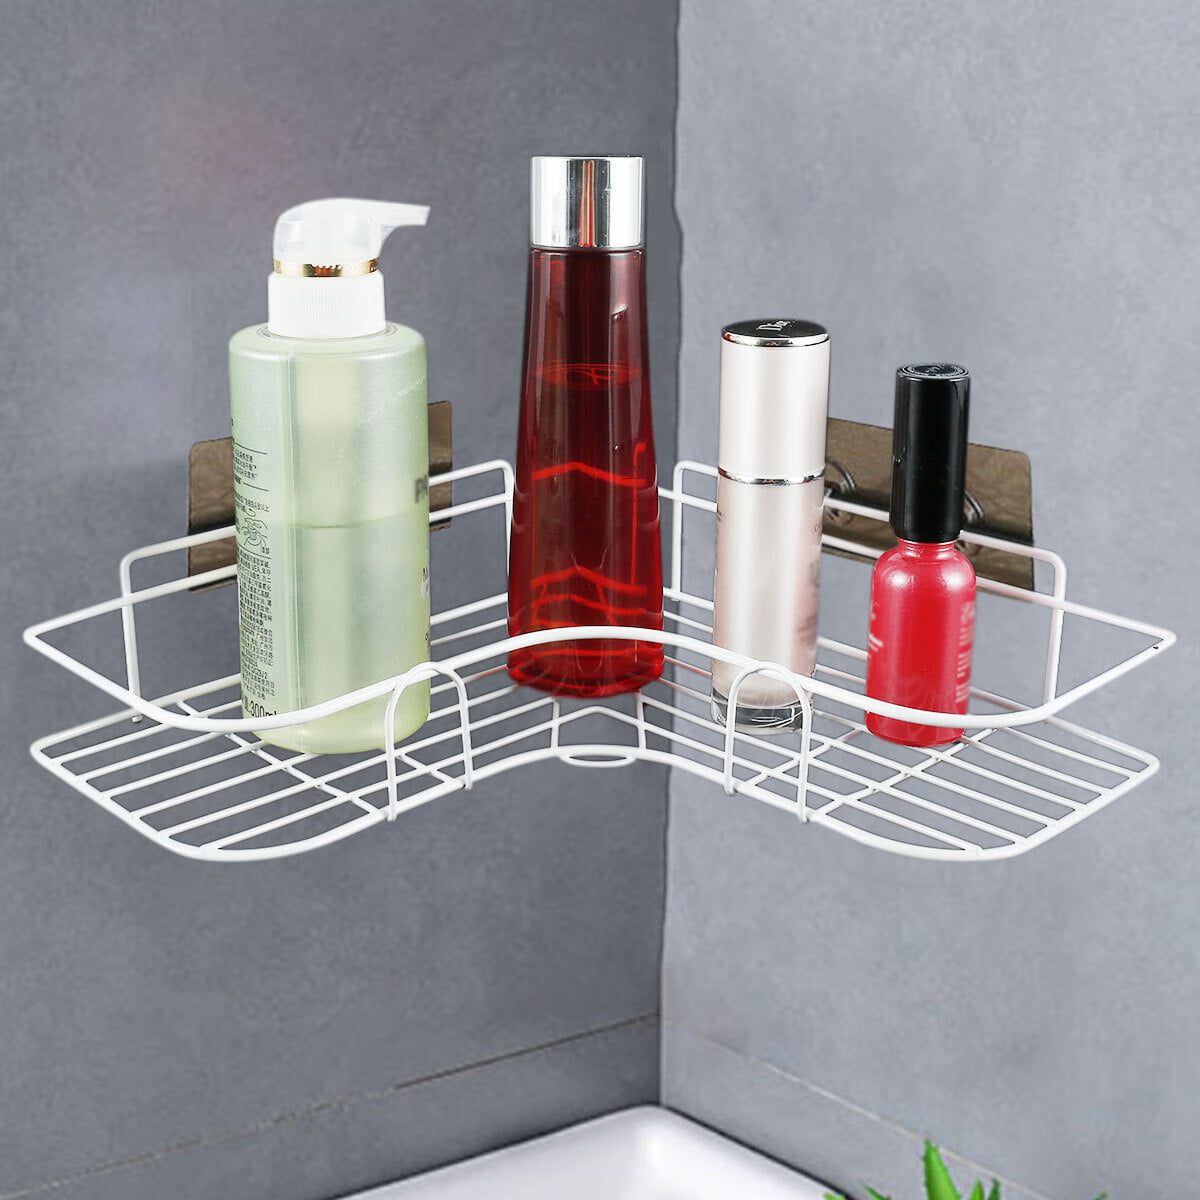 Glass Shower Caddy Corner Shelves (Adhesive included, drilling is optional)